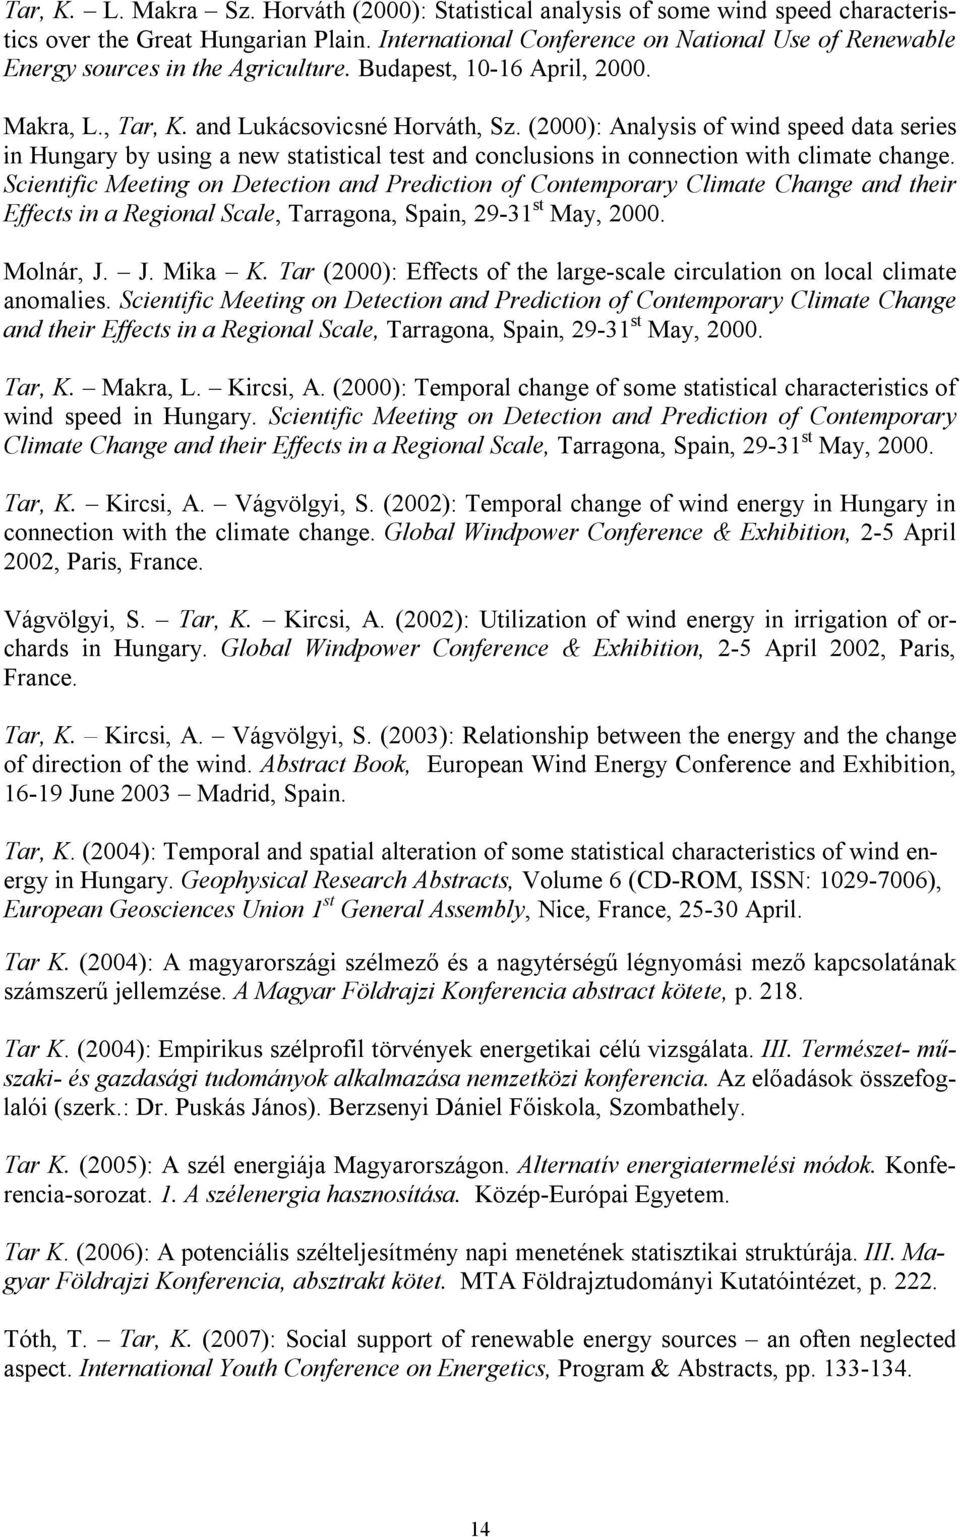 (2000): Analysis of wind speed data series in Hungary by using a new statistical test and conclusions in connection with climate change.